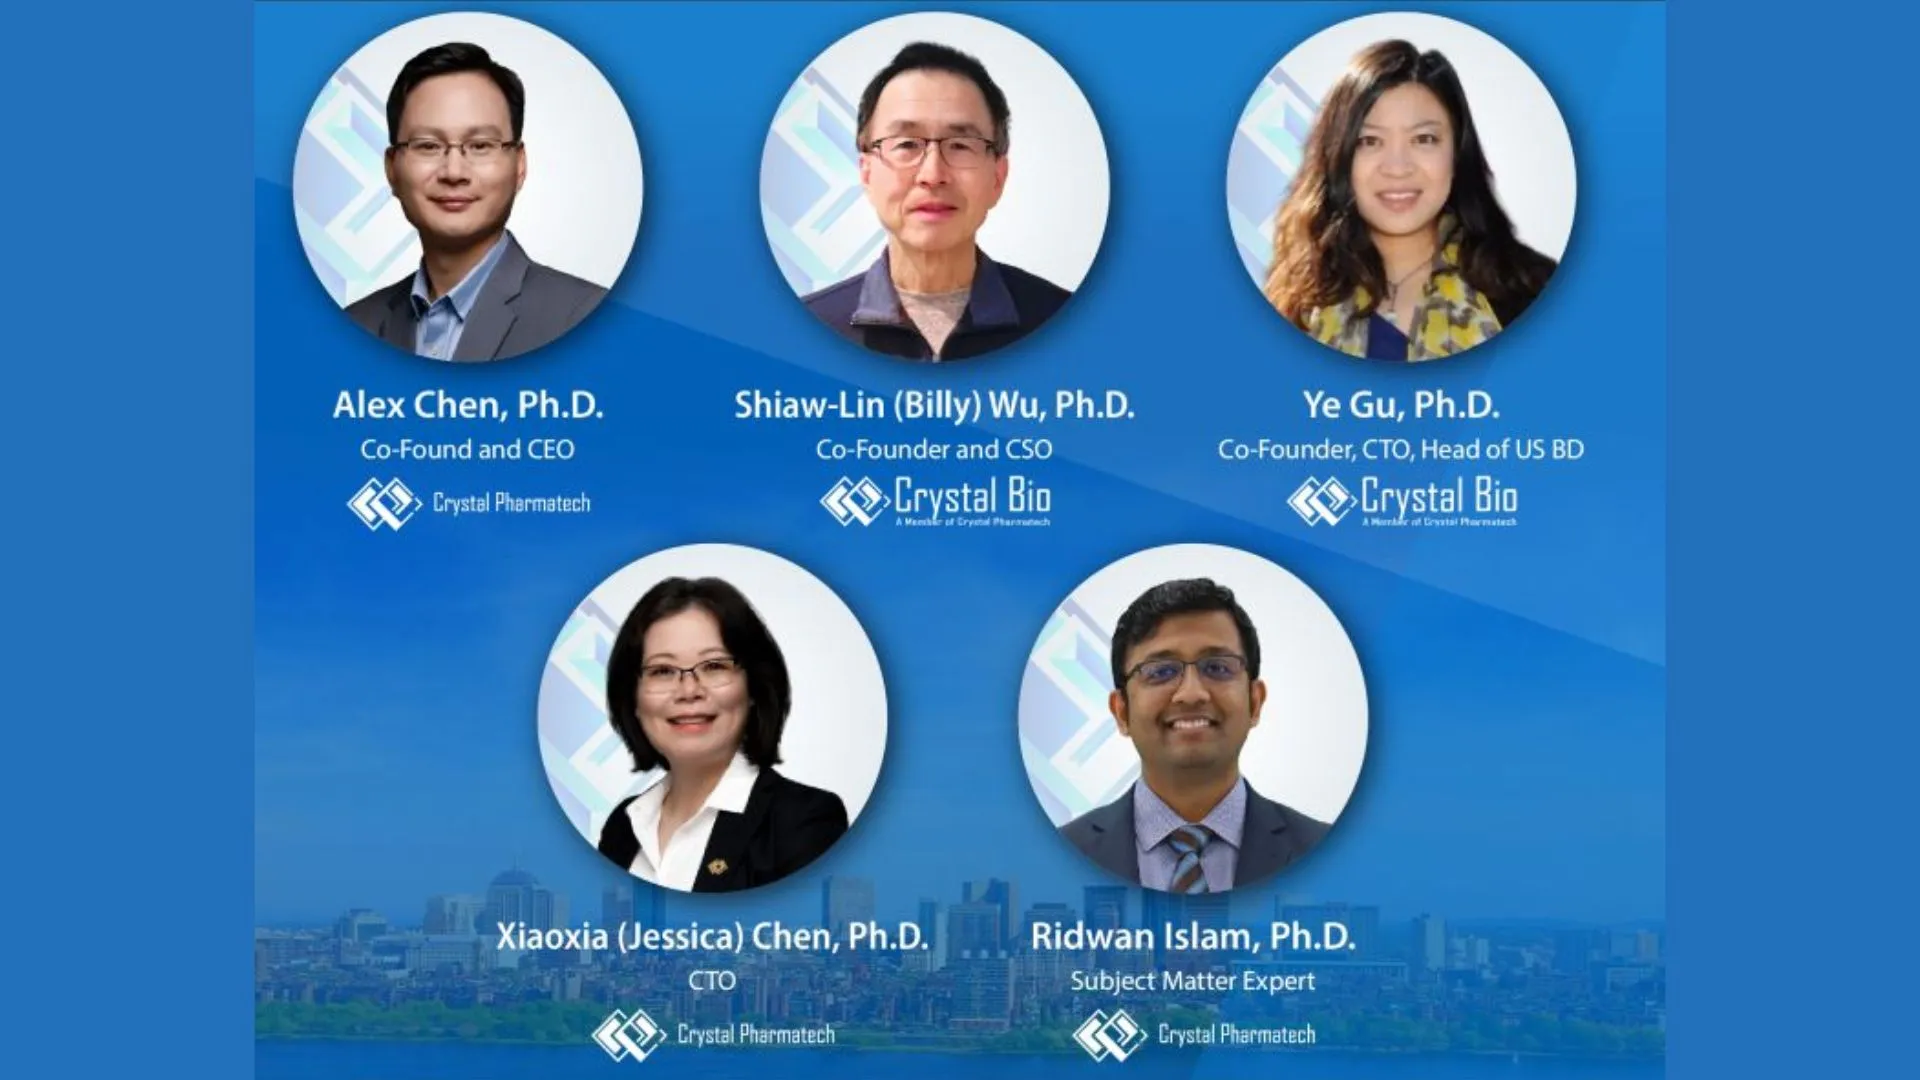 Join Crystal Pharmatech for the Sino-American Pharmaceutical Professionals Association (SAPA) NE 26th Annual Conference